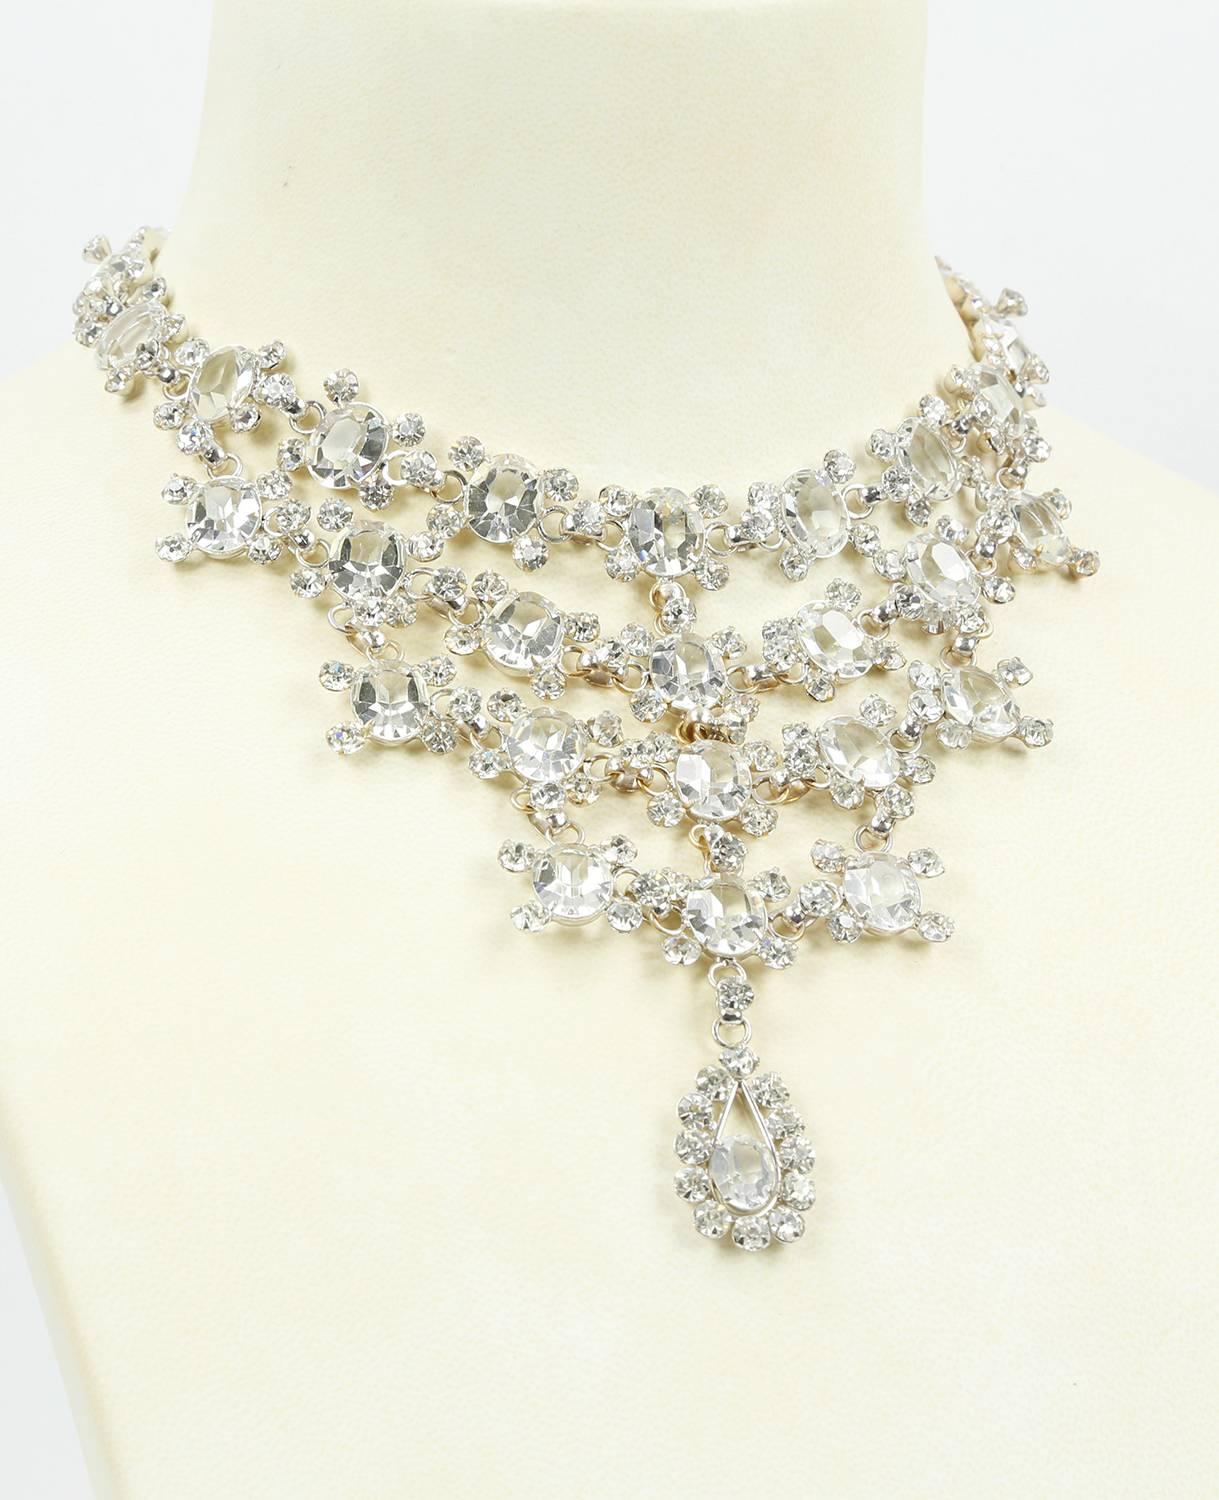 Impressive and Highly Striking Bib Necklace set with Sparkling CZs; measuring approx: 15